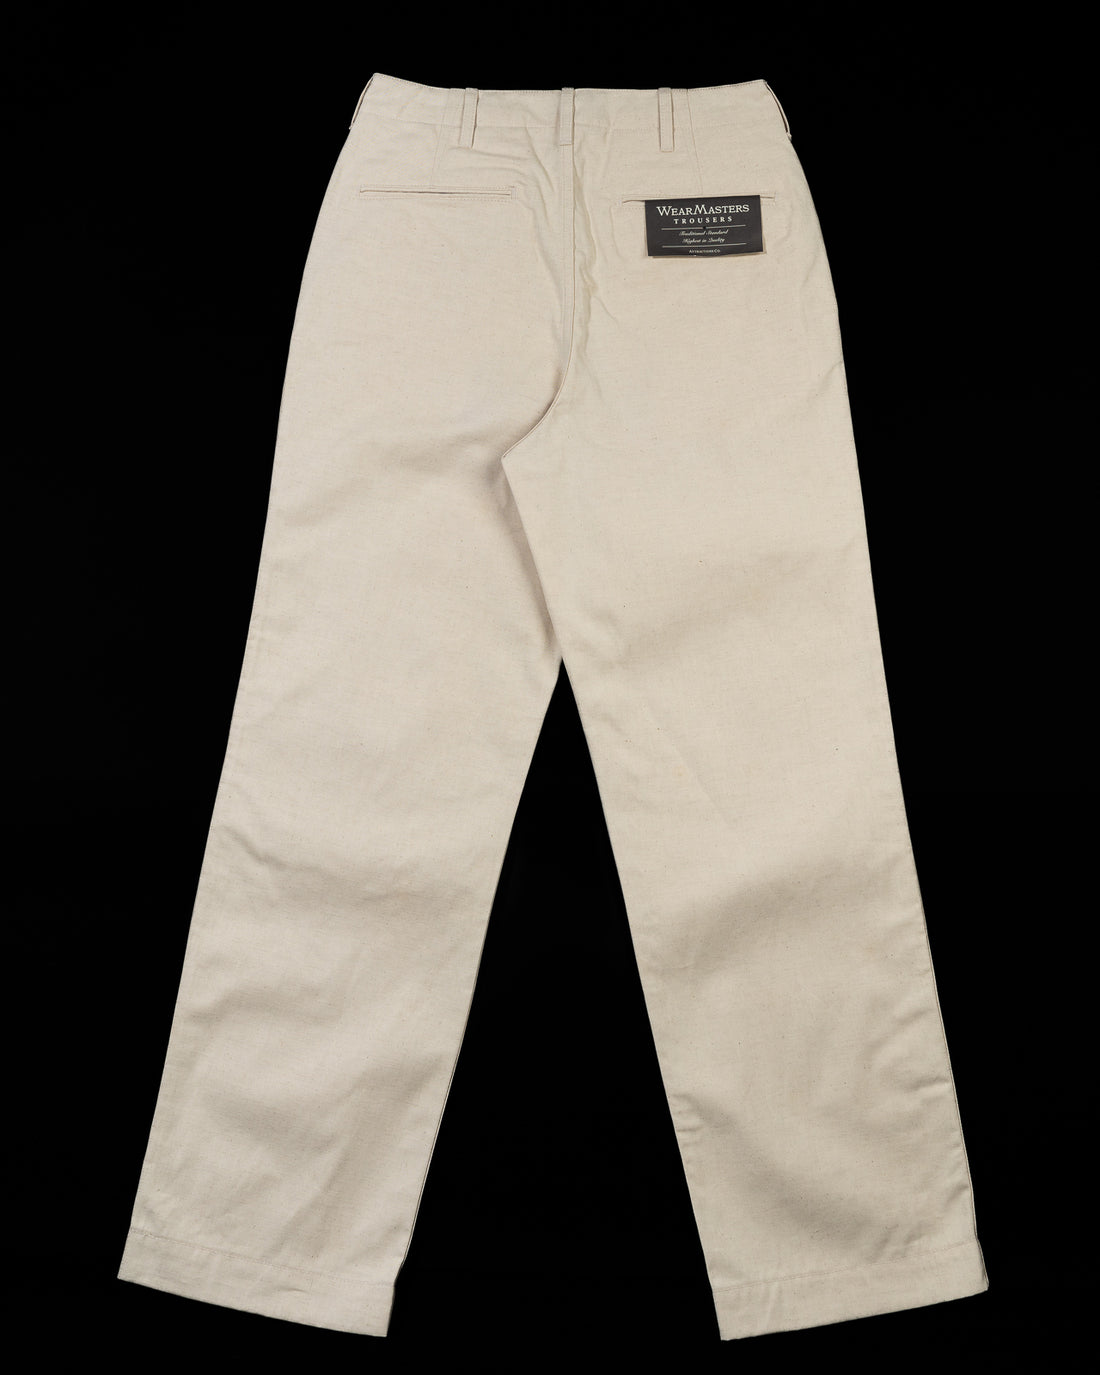 Attractions Milfolk CL Trousers - Natural - Standard & Strange